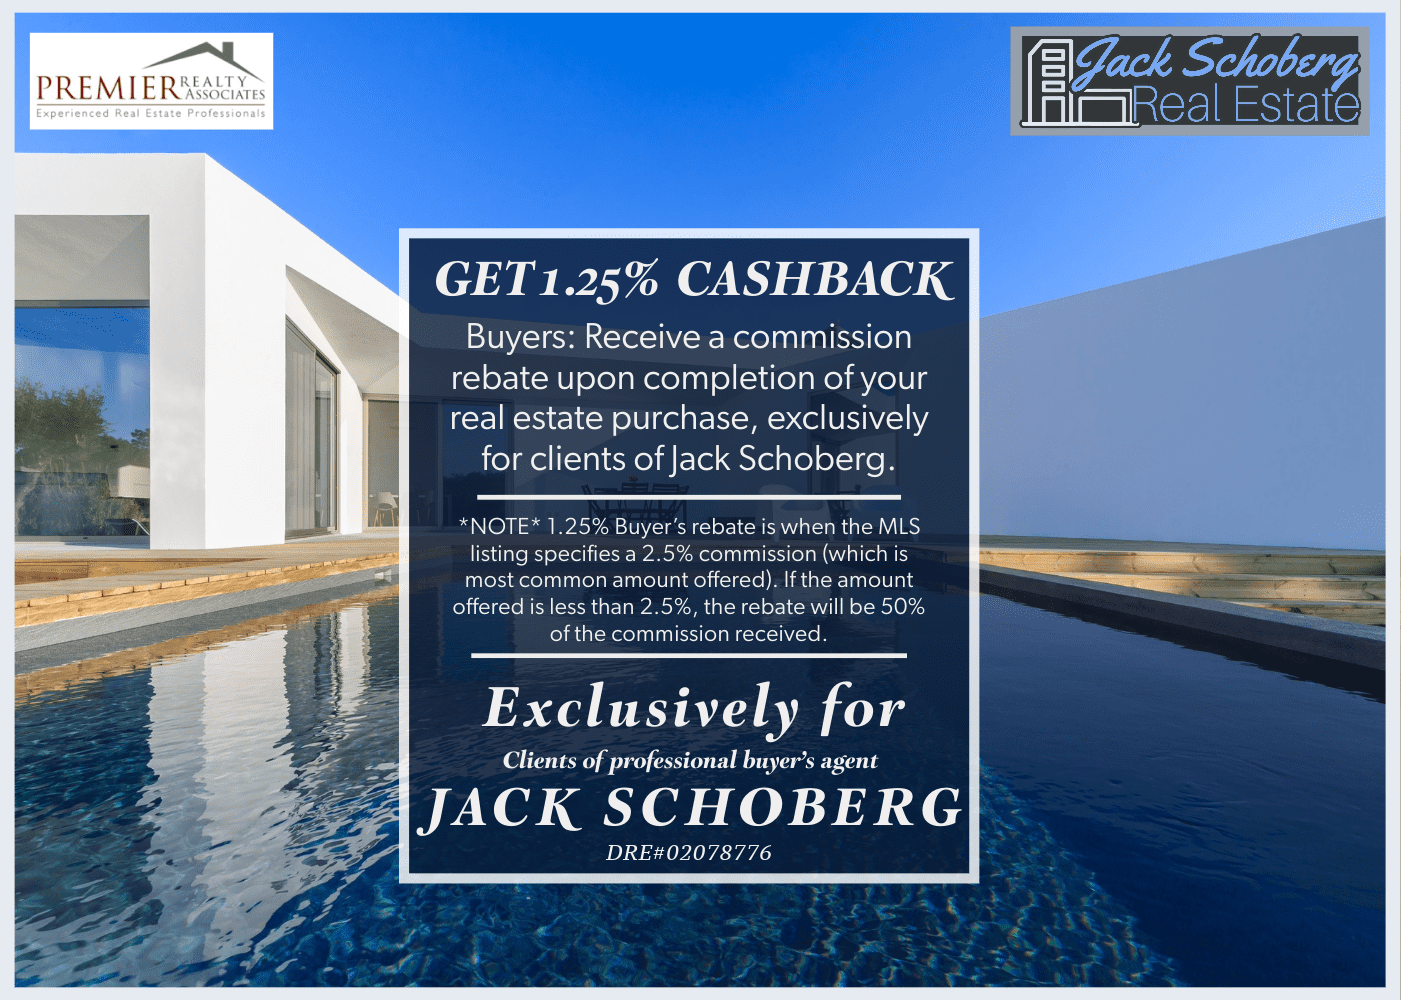 Receive a 50% commission rebate good for up to 1.25% Cash Back payable upon the close of escrow! Exclusively for client's of Jack Schoberg.